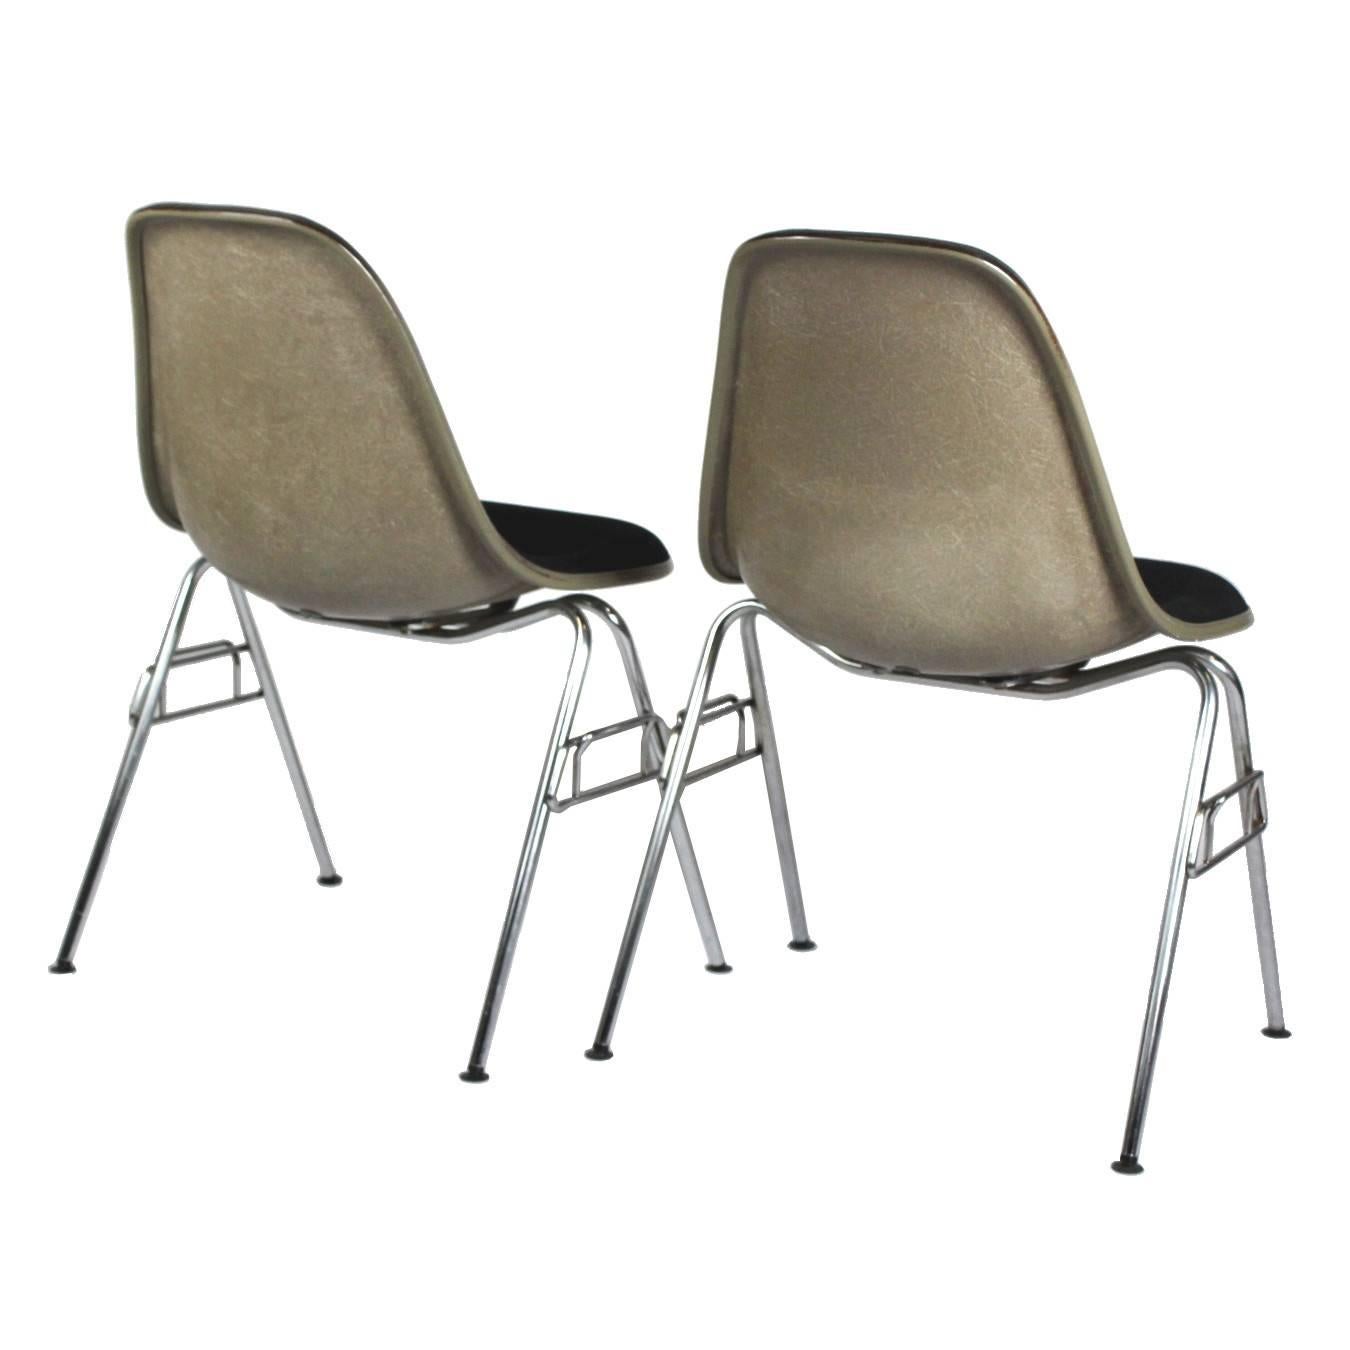 Central American 1970s Pair of Stacking Chairs by Ray and Charles Eames for Herman Miller